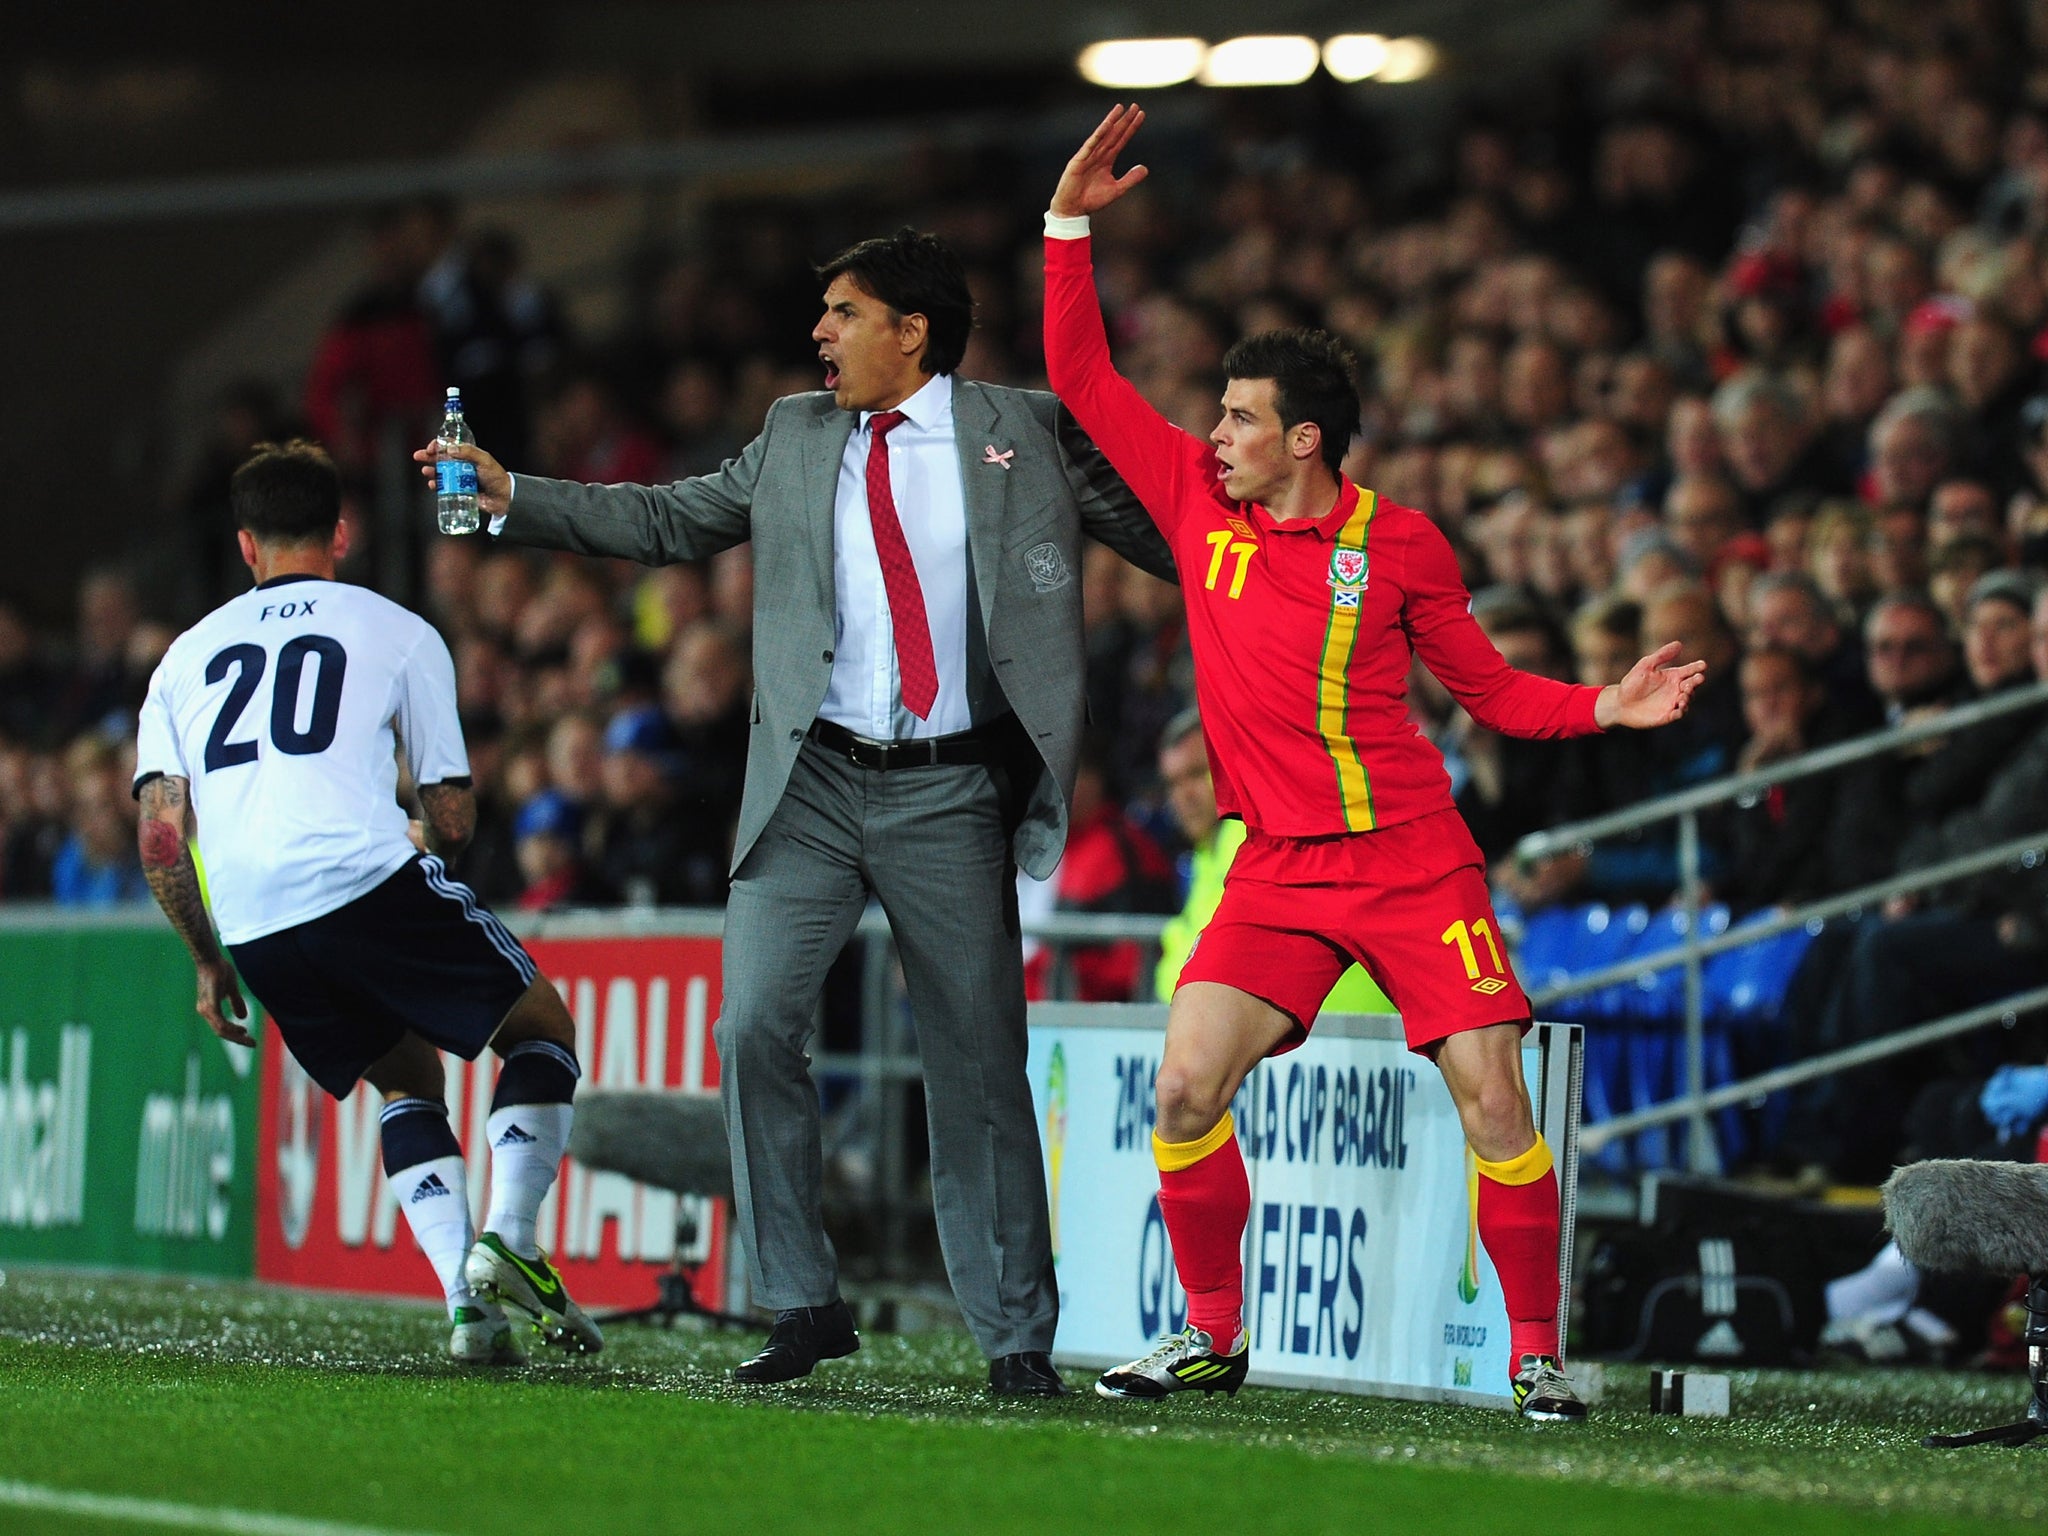 Chris Coleman remonstrates on the touchline with Gareth Bale as Wales take on Scotland